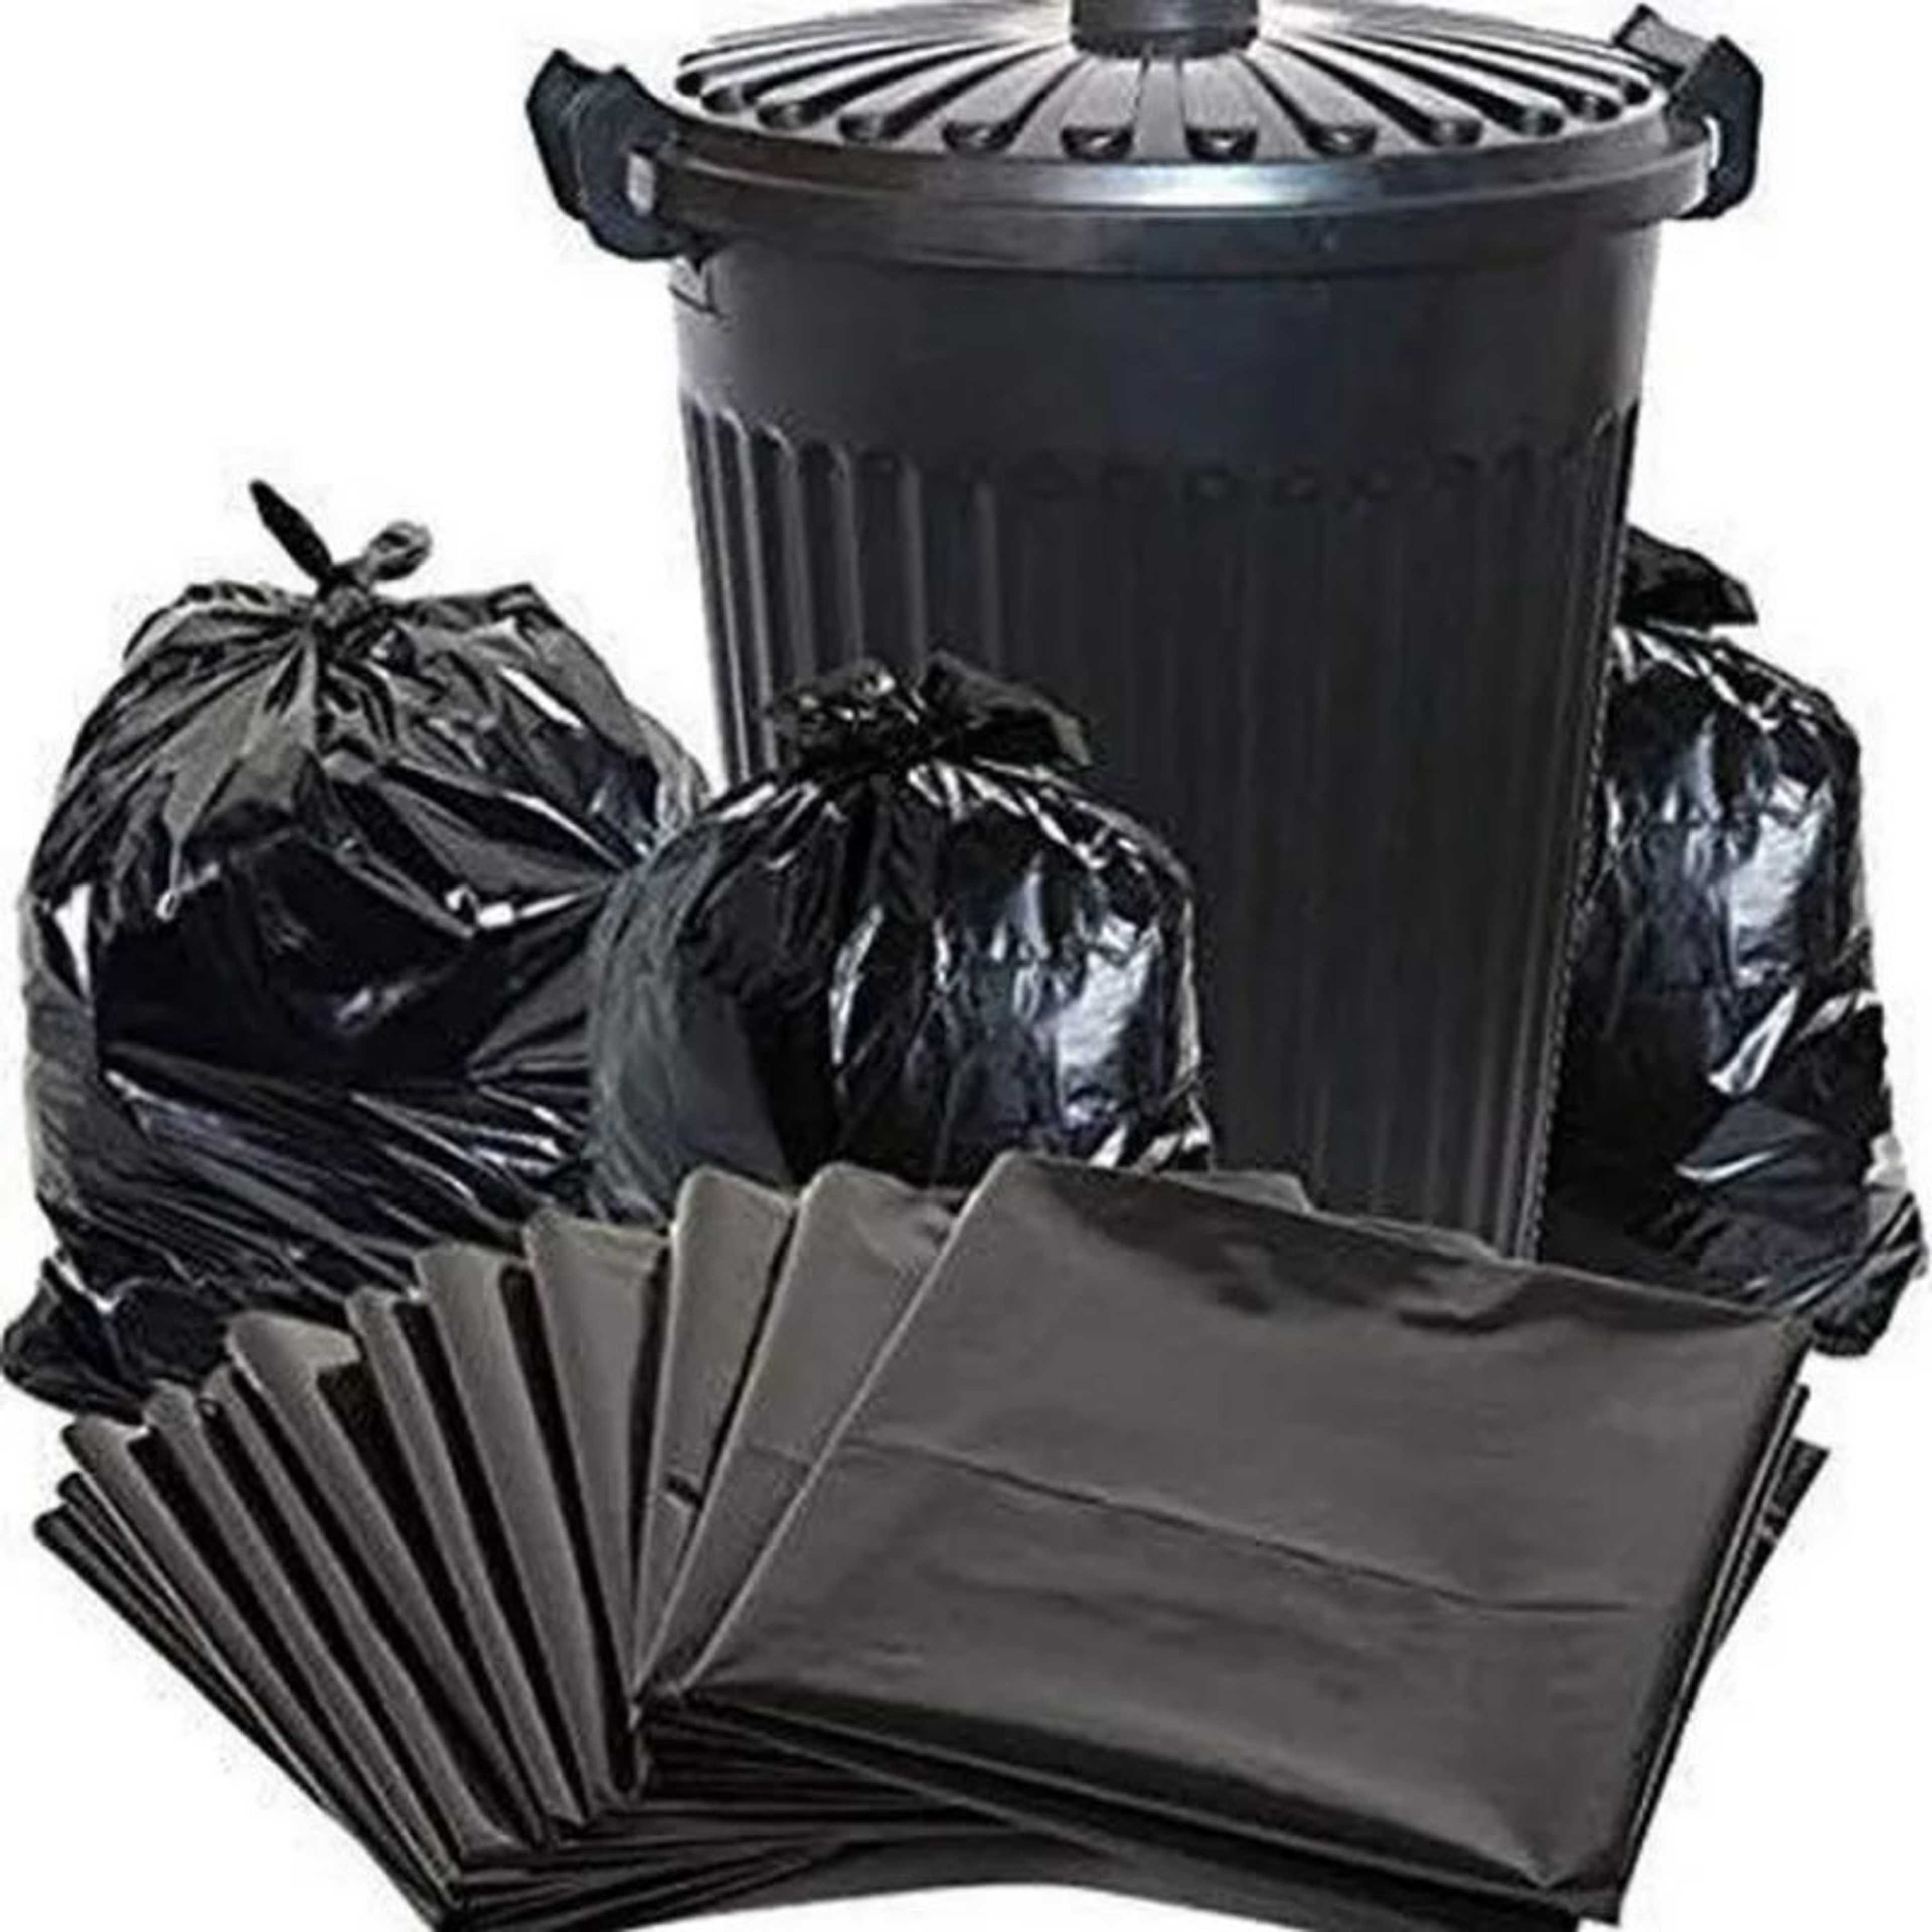 AlClean Garbage Bags for Dust Bins Pure Plastic High Quality (Sizes Available)